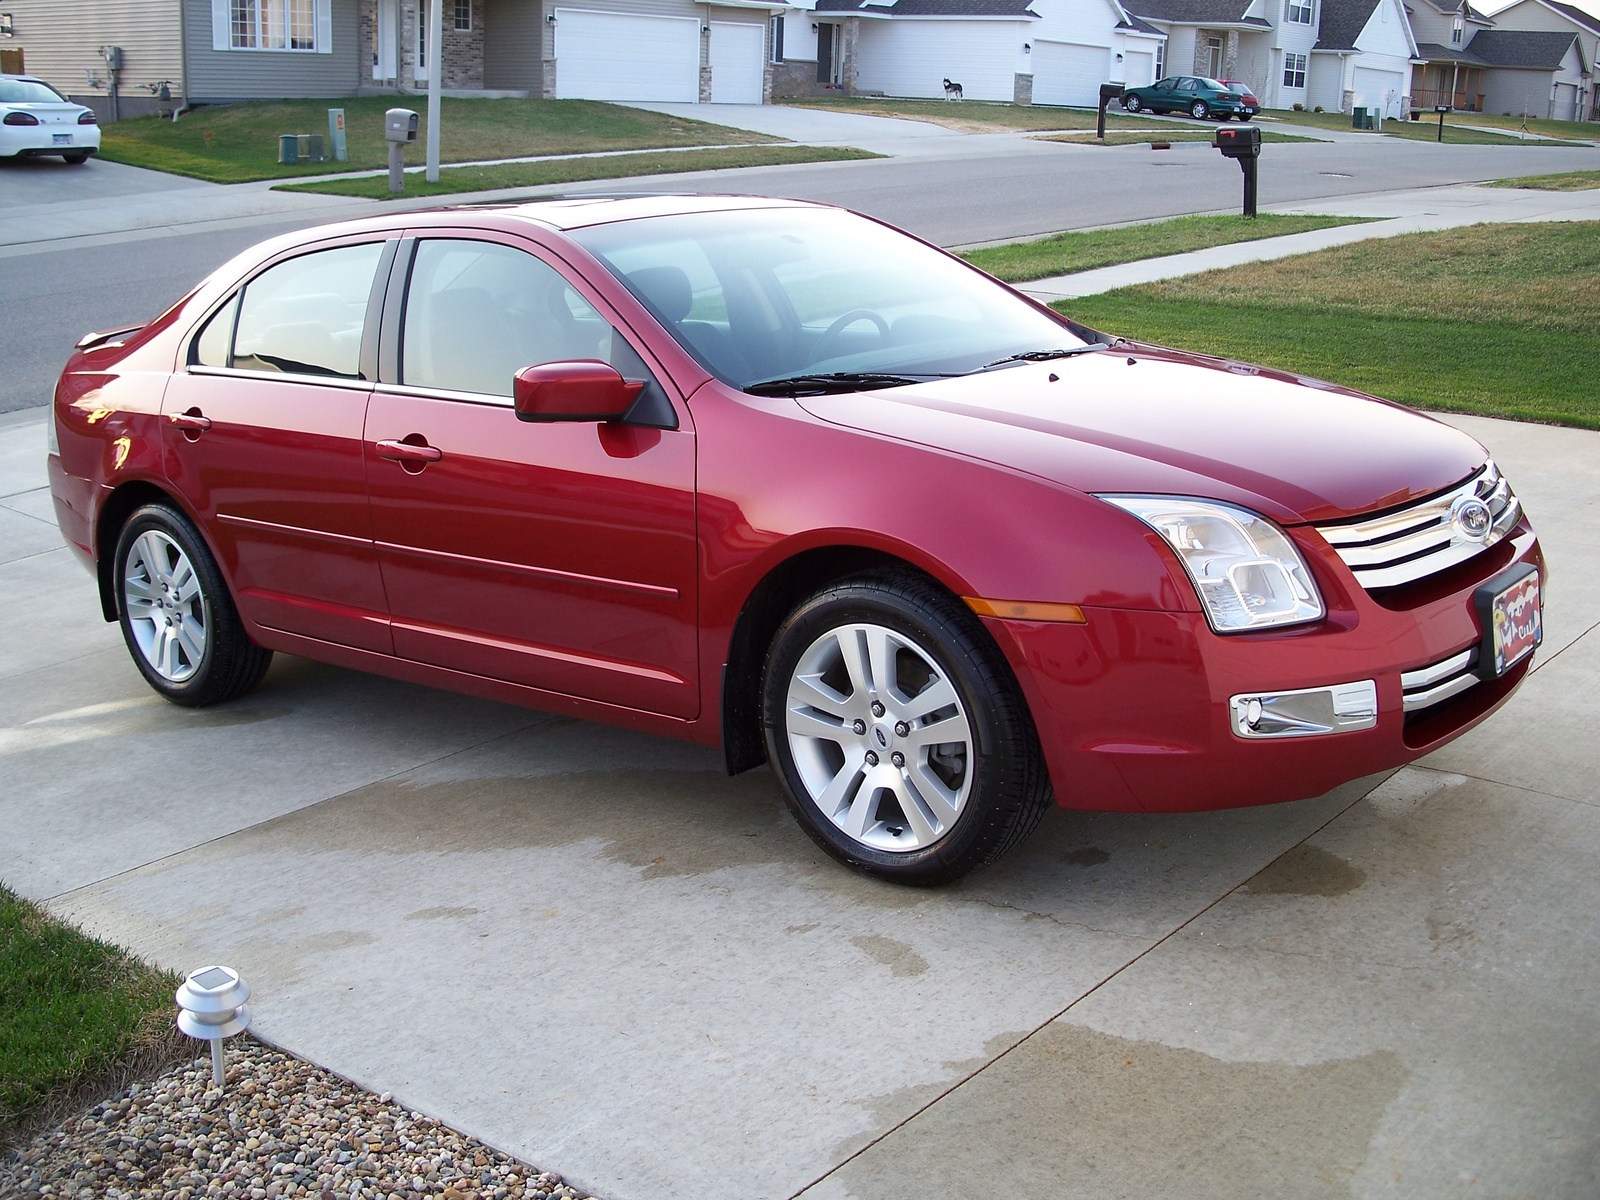 Ford Five-Hundred 2008: Review, Amazing Pictures and 